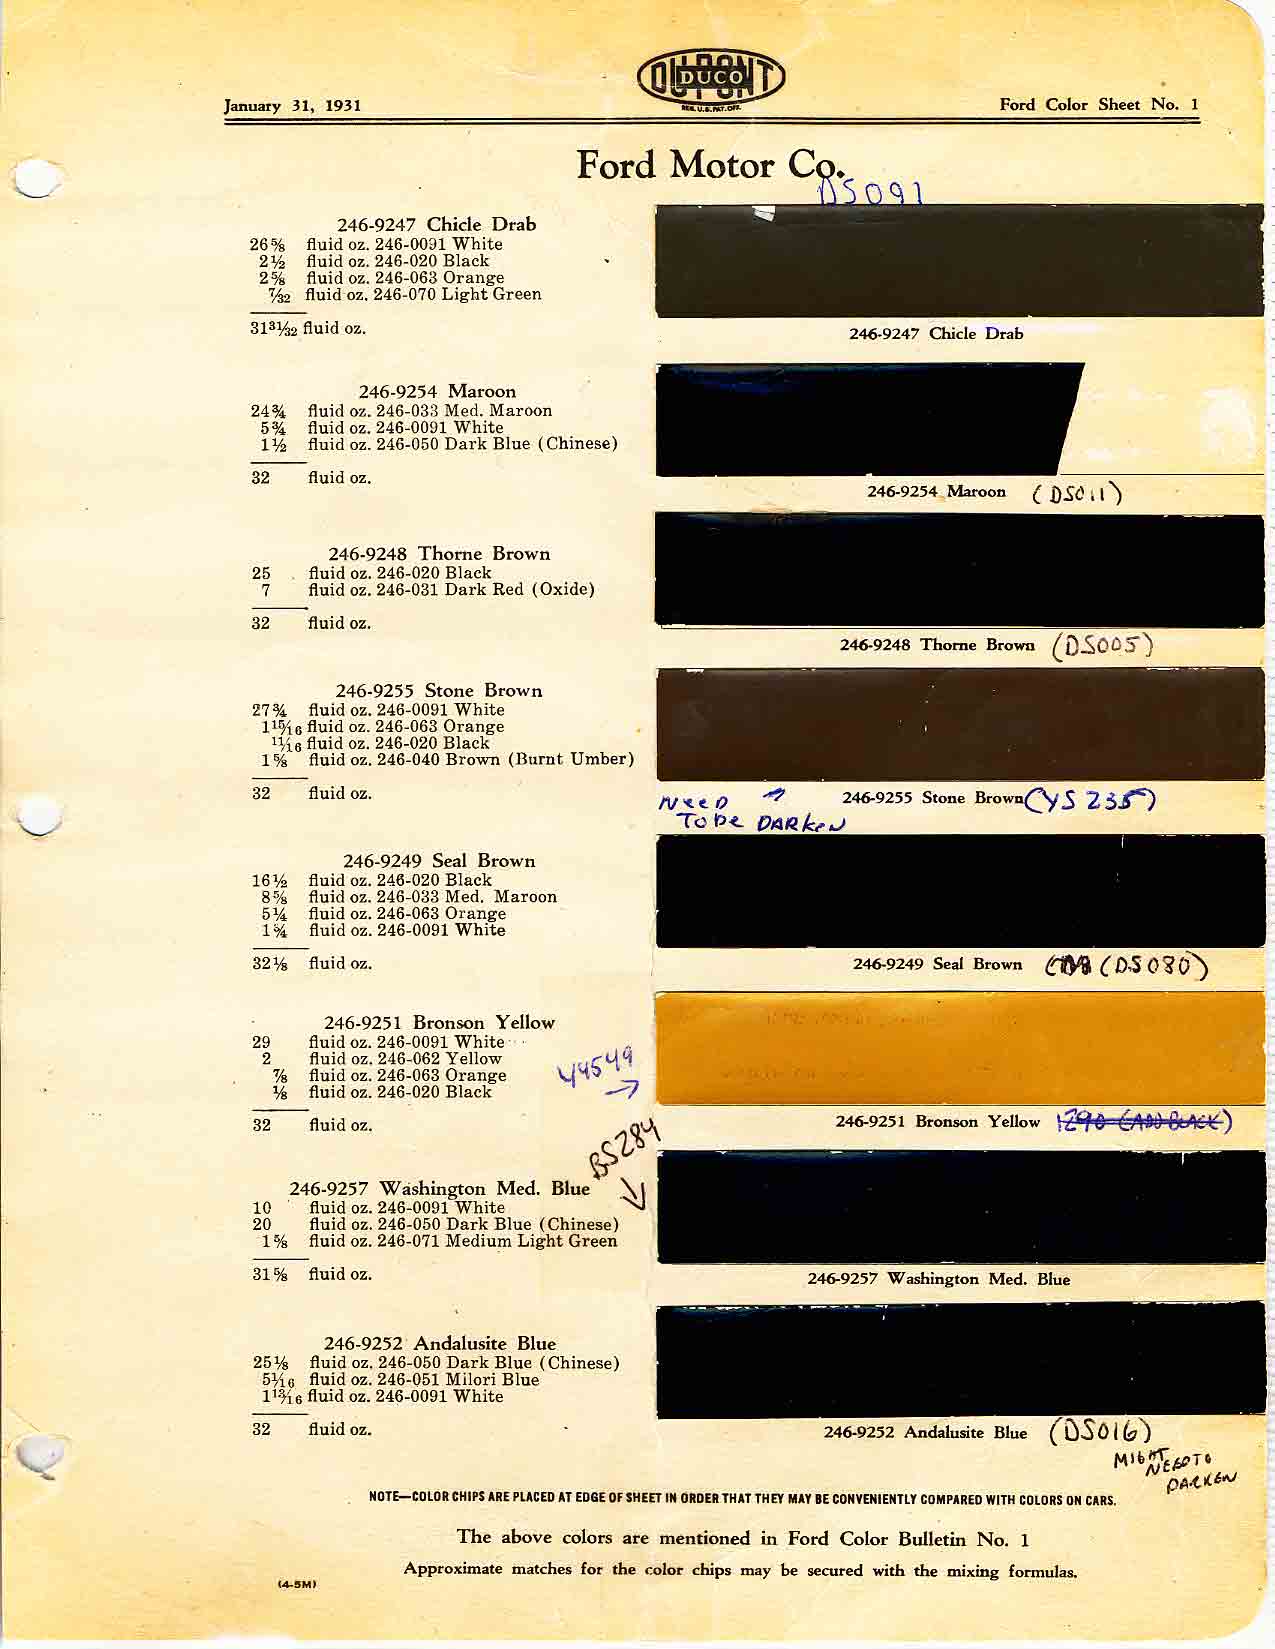 Colors used on Ford Model A Vehicles in 1930